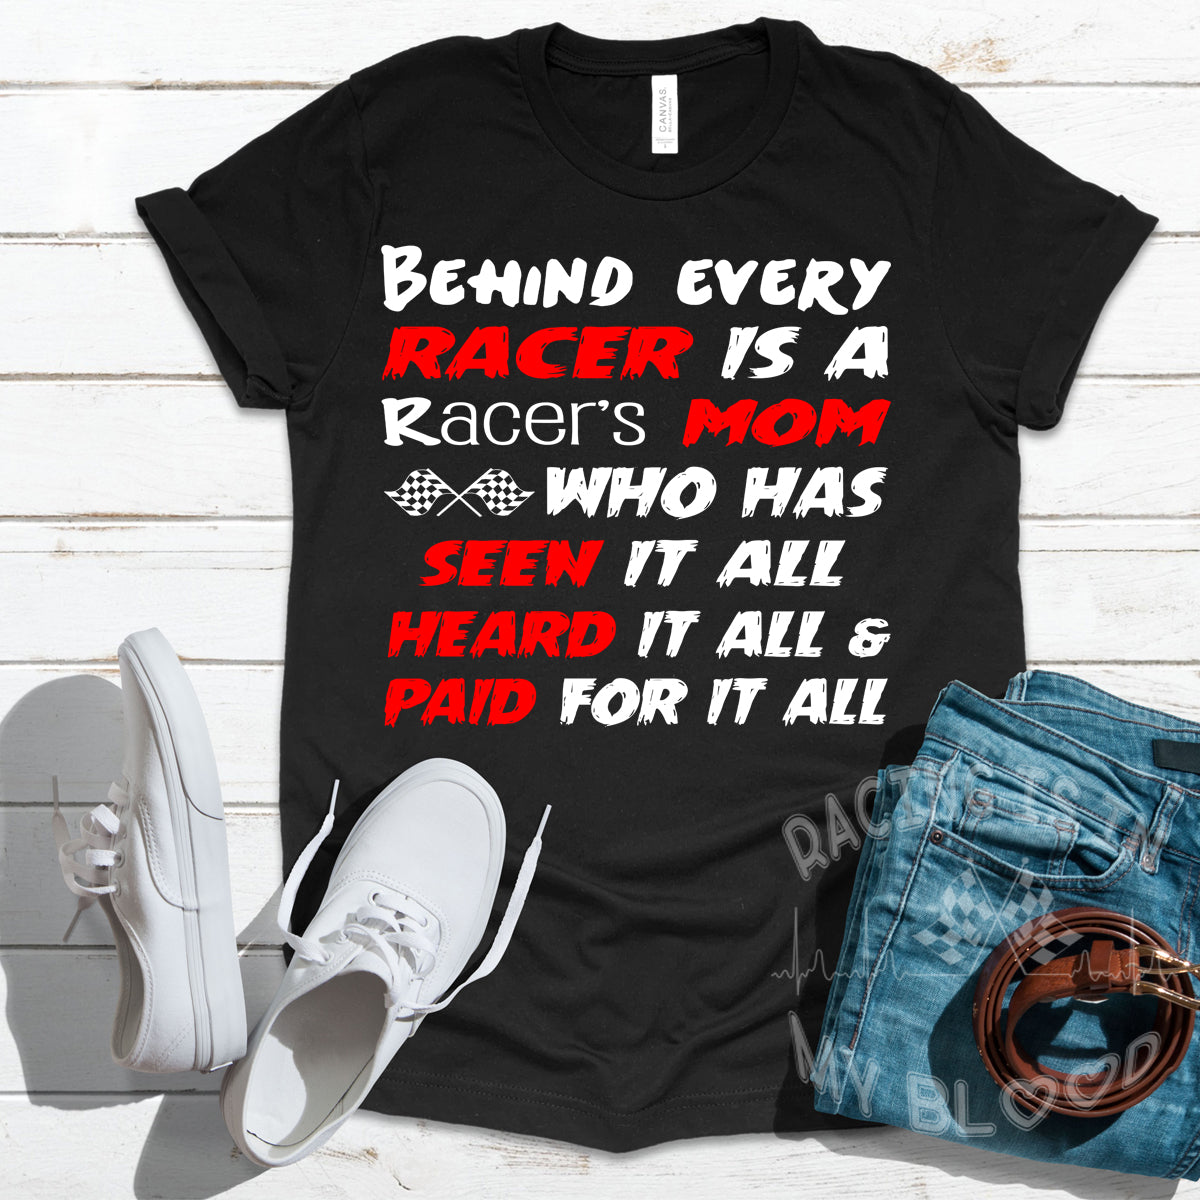 Behind Every Racer Is A Racer's Mom T-Shirts!